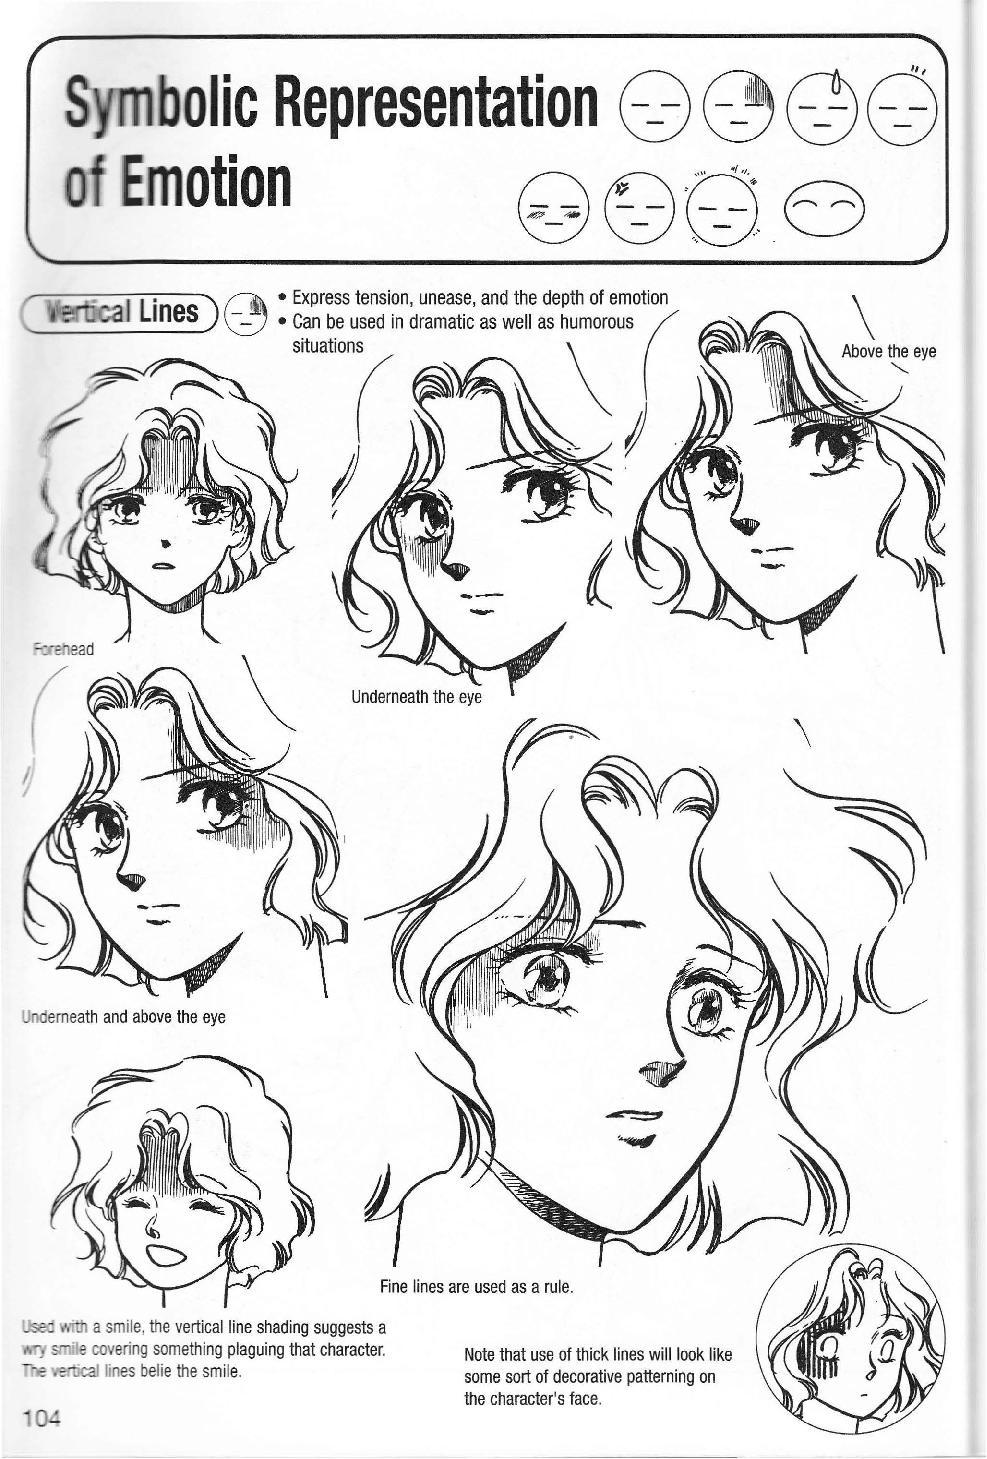 More How to Draw Manga Vol. 2 - Penning Characters 105